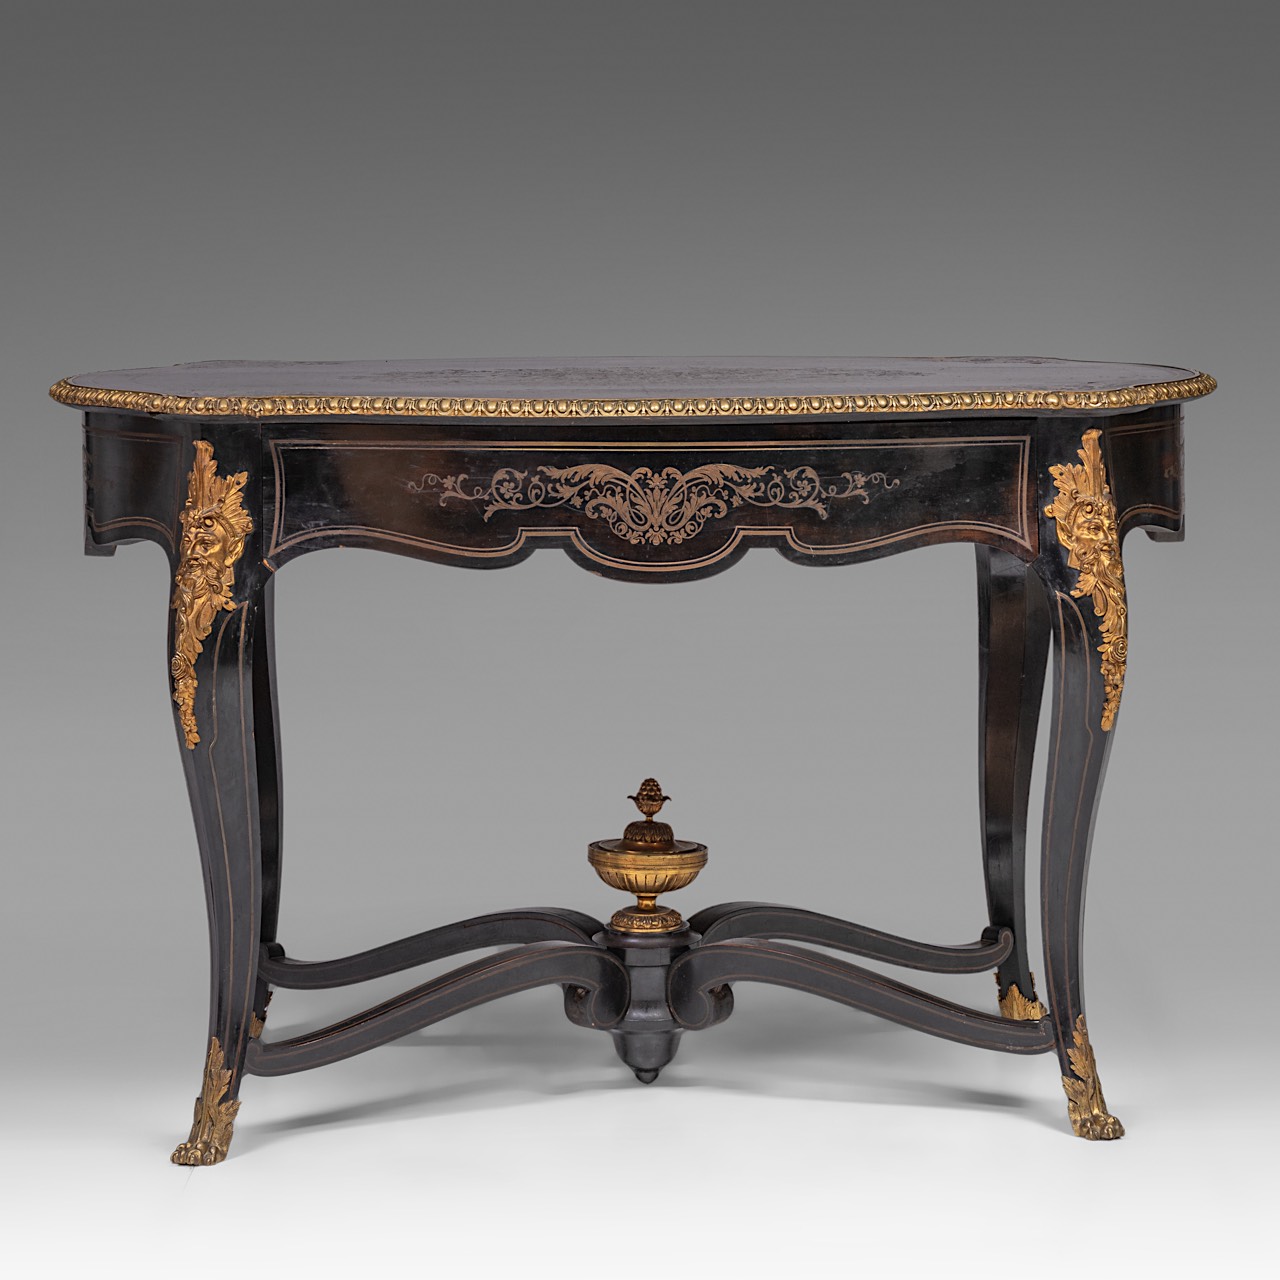 A Napoleon III (1852-1870) Boulle centre table, stamped 'HPR' Henri Picard (1840-1890), H 75 - W 120 - Image 2 of 10